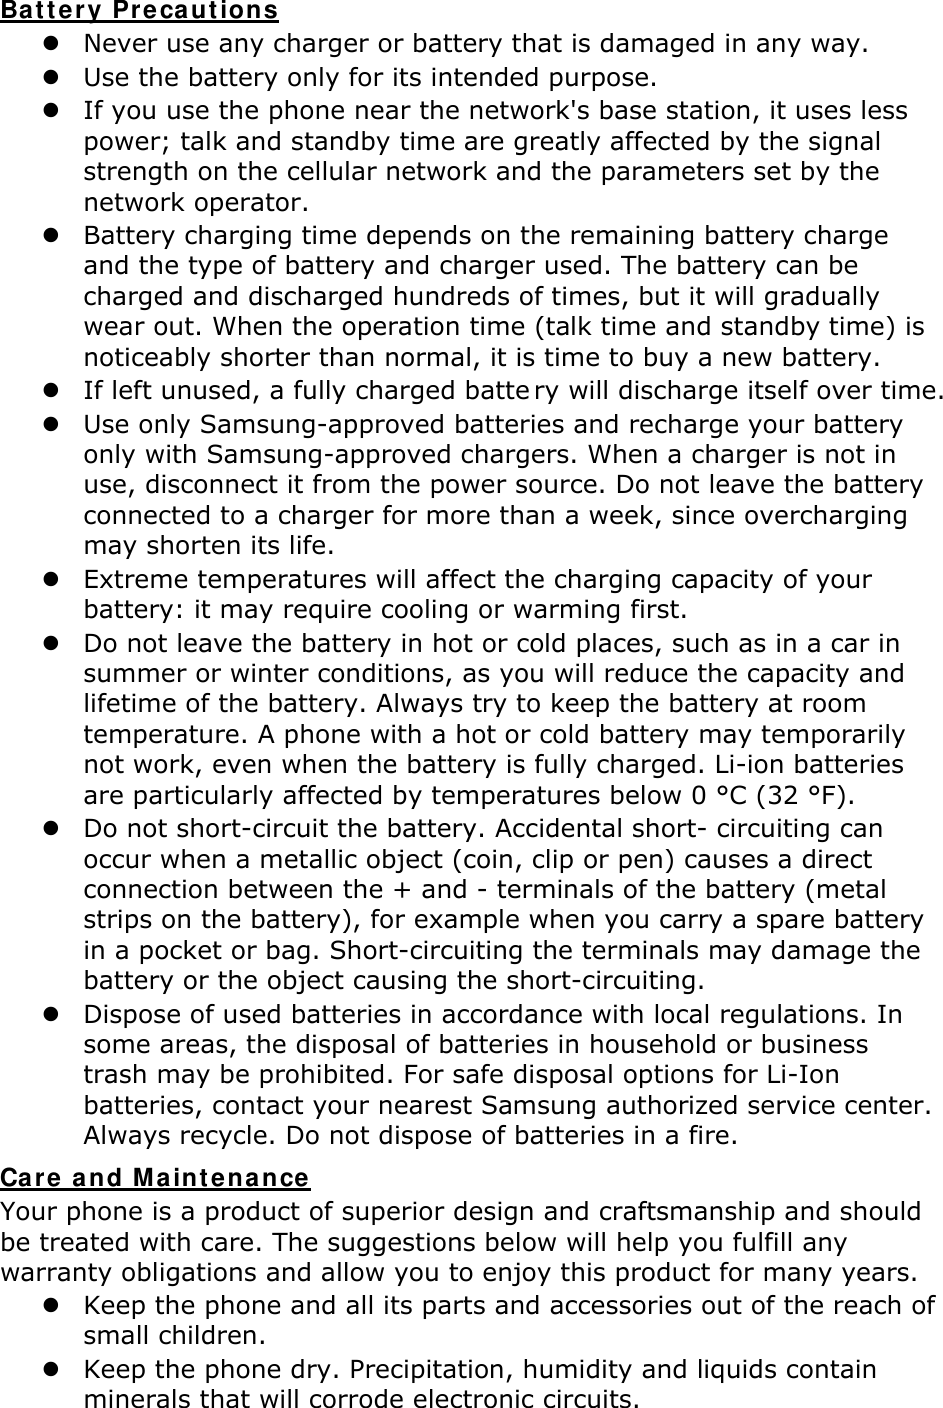 UBattery Precautions z Never use any charger or battery that is damaged in any way. z Use the battery only for its intended purpose. z If you use the phone near the network&apos;s base station, it uses less power; talk and standby time are greatly affected by the signal strength on the cellular network and the parameters set by the network operator. z Battery charging time depends on the remaining battery charge and the type of battery and charger used. The battery can be charged and discharged hundreds of times, but it will gradually wear out. When the operation time (talk time and standby time) is noticeably shorter than normal, it is time to buy a new battery. z If left unused, a fully charged batte ry will discharge itself over time.  z Use only Samsung-approved batteries and recharge your battery only with Samsung-approved chargers. When a charger is not in use, disconnect it from the power source. Do not leave the battery connected to a charger for more than a week, since overcharging may shorten its life. z Extreme temperatures will affect the charging capacity of your battery: it may require cooling or warming first. z Do not leave the battery in hot or cold places, such as in a car in summer or winter conditions, as you will reduce the capacity and lifetime of the battery. Always try to keep the battery at room temperature. A phone with a hot or cold battery may temporarily not work, even when the battery is fully charged. Li-ion batteries are particularly affected by temperatures below 0 °C (32 °F). z Do not short-circuit the battery. Accidental short- circuiting can occur when a metallic object (coin, clip or pen) causes a direct connection between the + and - terminals of the battery (metal strips on the battery), for example when you carry a spare battery in a pocket or bag. Short-circuiting the terminals may damage the battery or the object causing the short-circuiting. z Dispose of used batteries in accordance with local regulations. In some areas, the disposal of batteries in household or business trash may be prohibited. For safe disposal options for Li-Ion batteries, contact your nearest Samsung authorized service center. Always recycle. Do not dispose of batteries in a fire. UCare and Maintenance Your phone is a product of superior design and craftsmanship and should be treated with care. The suggestions below will help you fulfill any warranty obligations and allow you to enjoy this product for many years. z Keep the phone and all its parts and accessories out of the reach of small children. z Keep the phone dry. Precipitation, humidity and liquids contain minerals that will corrode electronic circuits. 